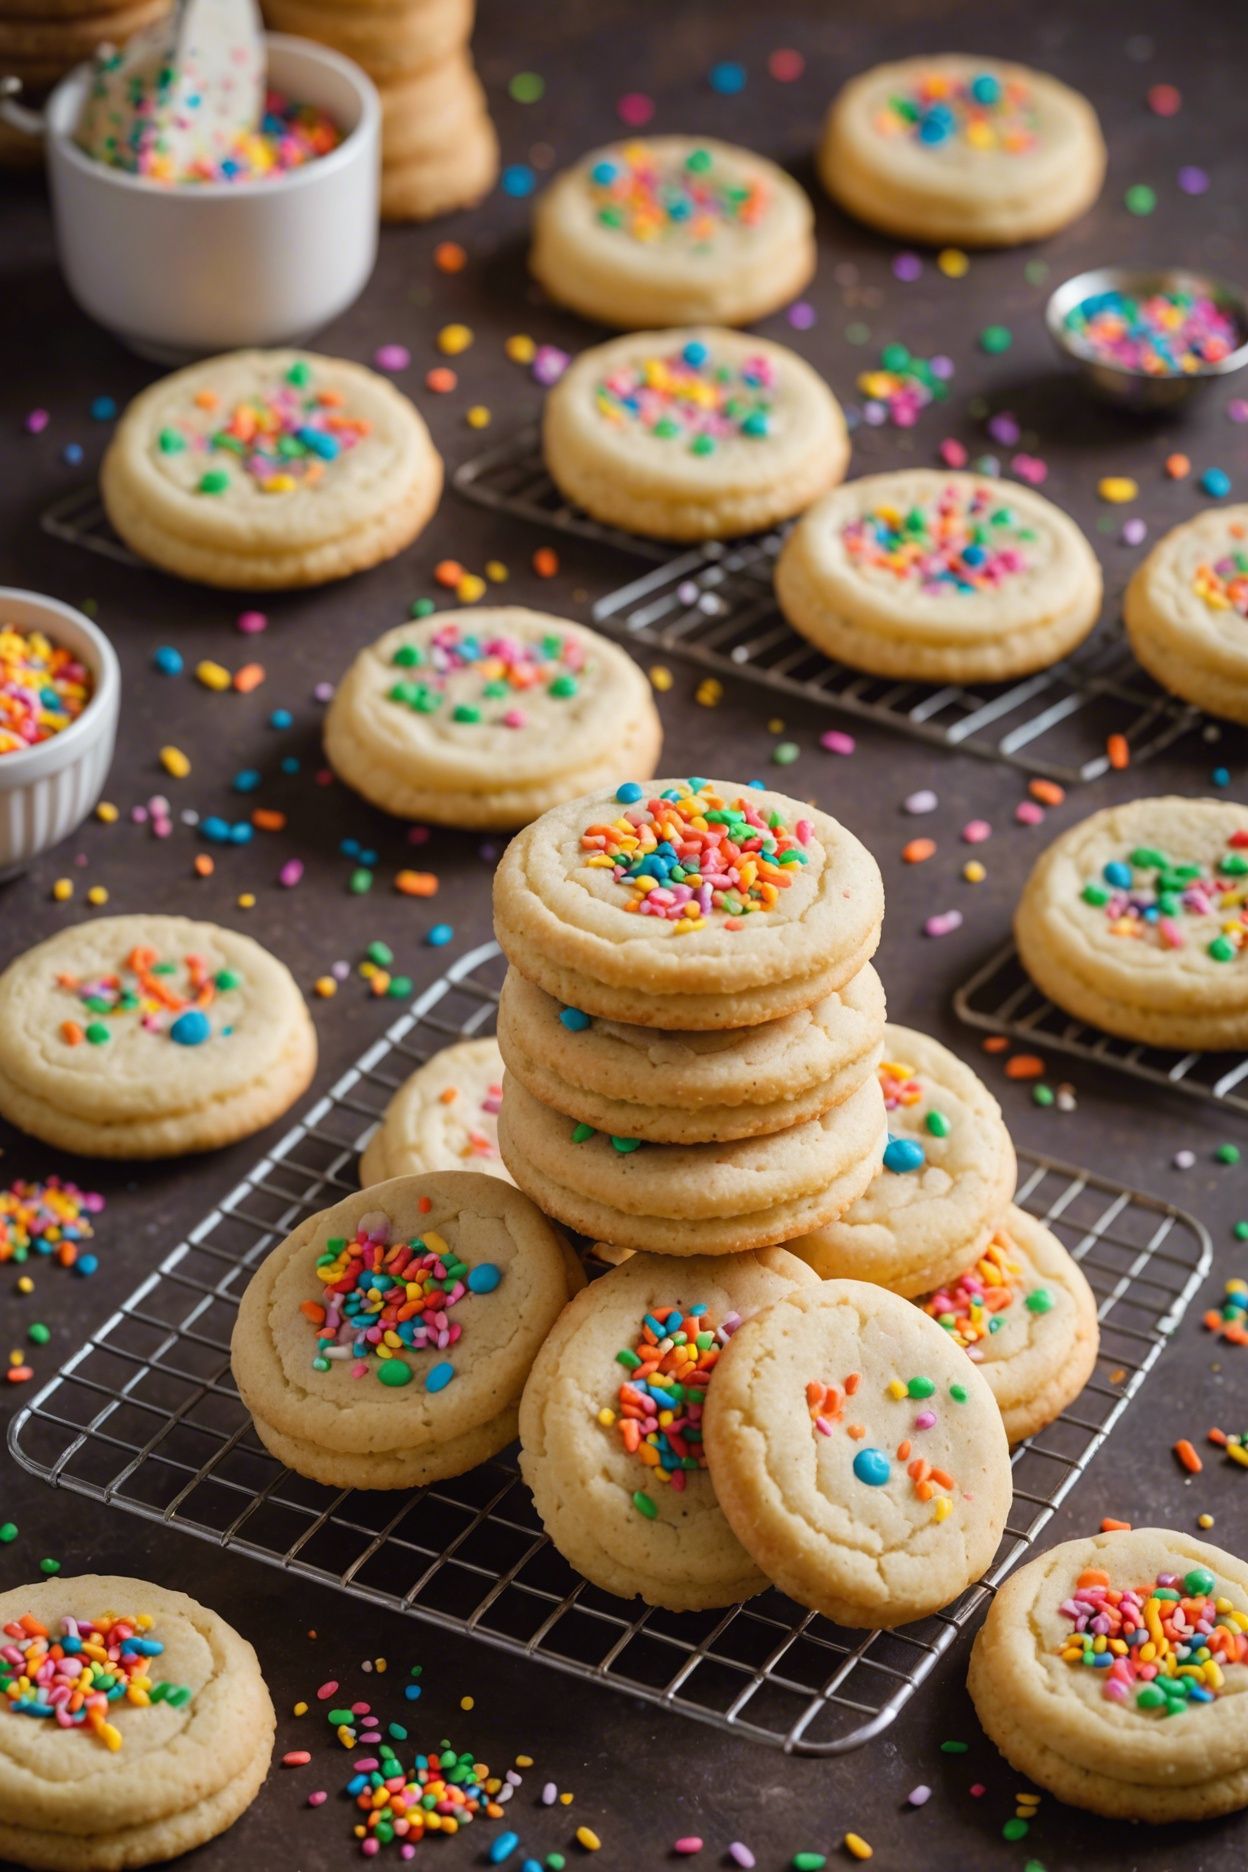 Roll About Sugar Cookies